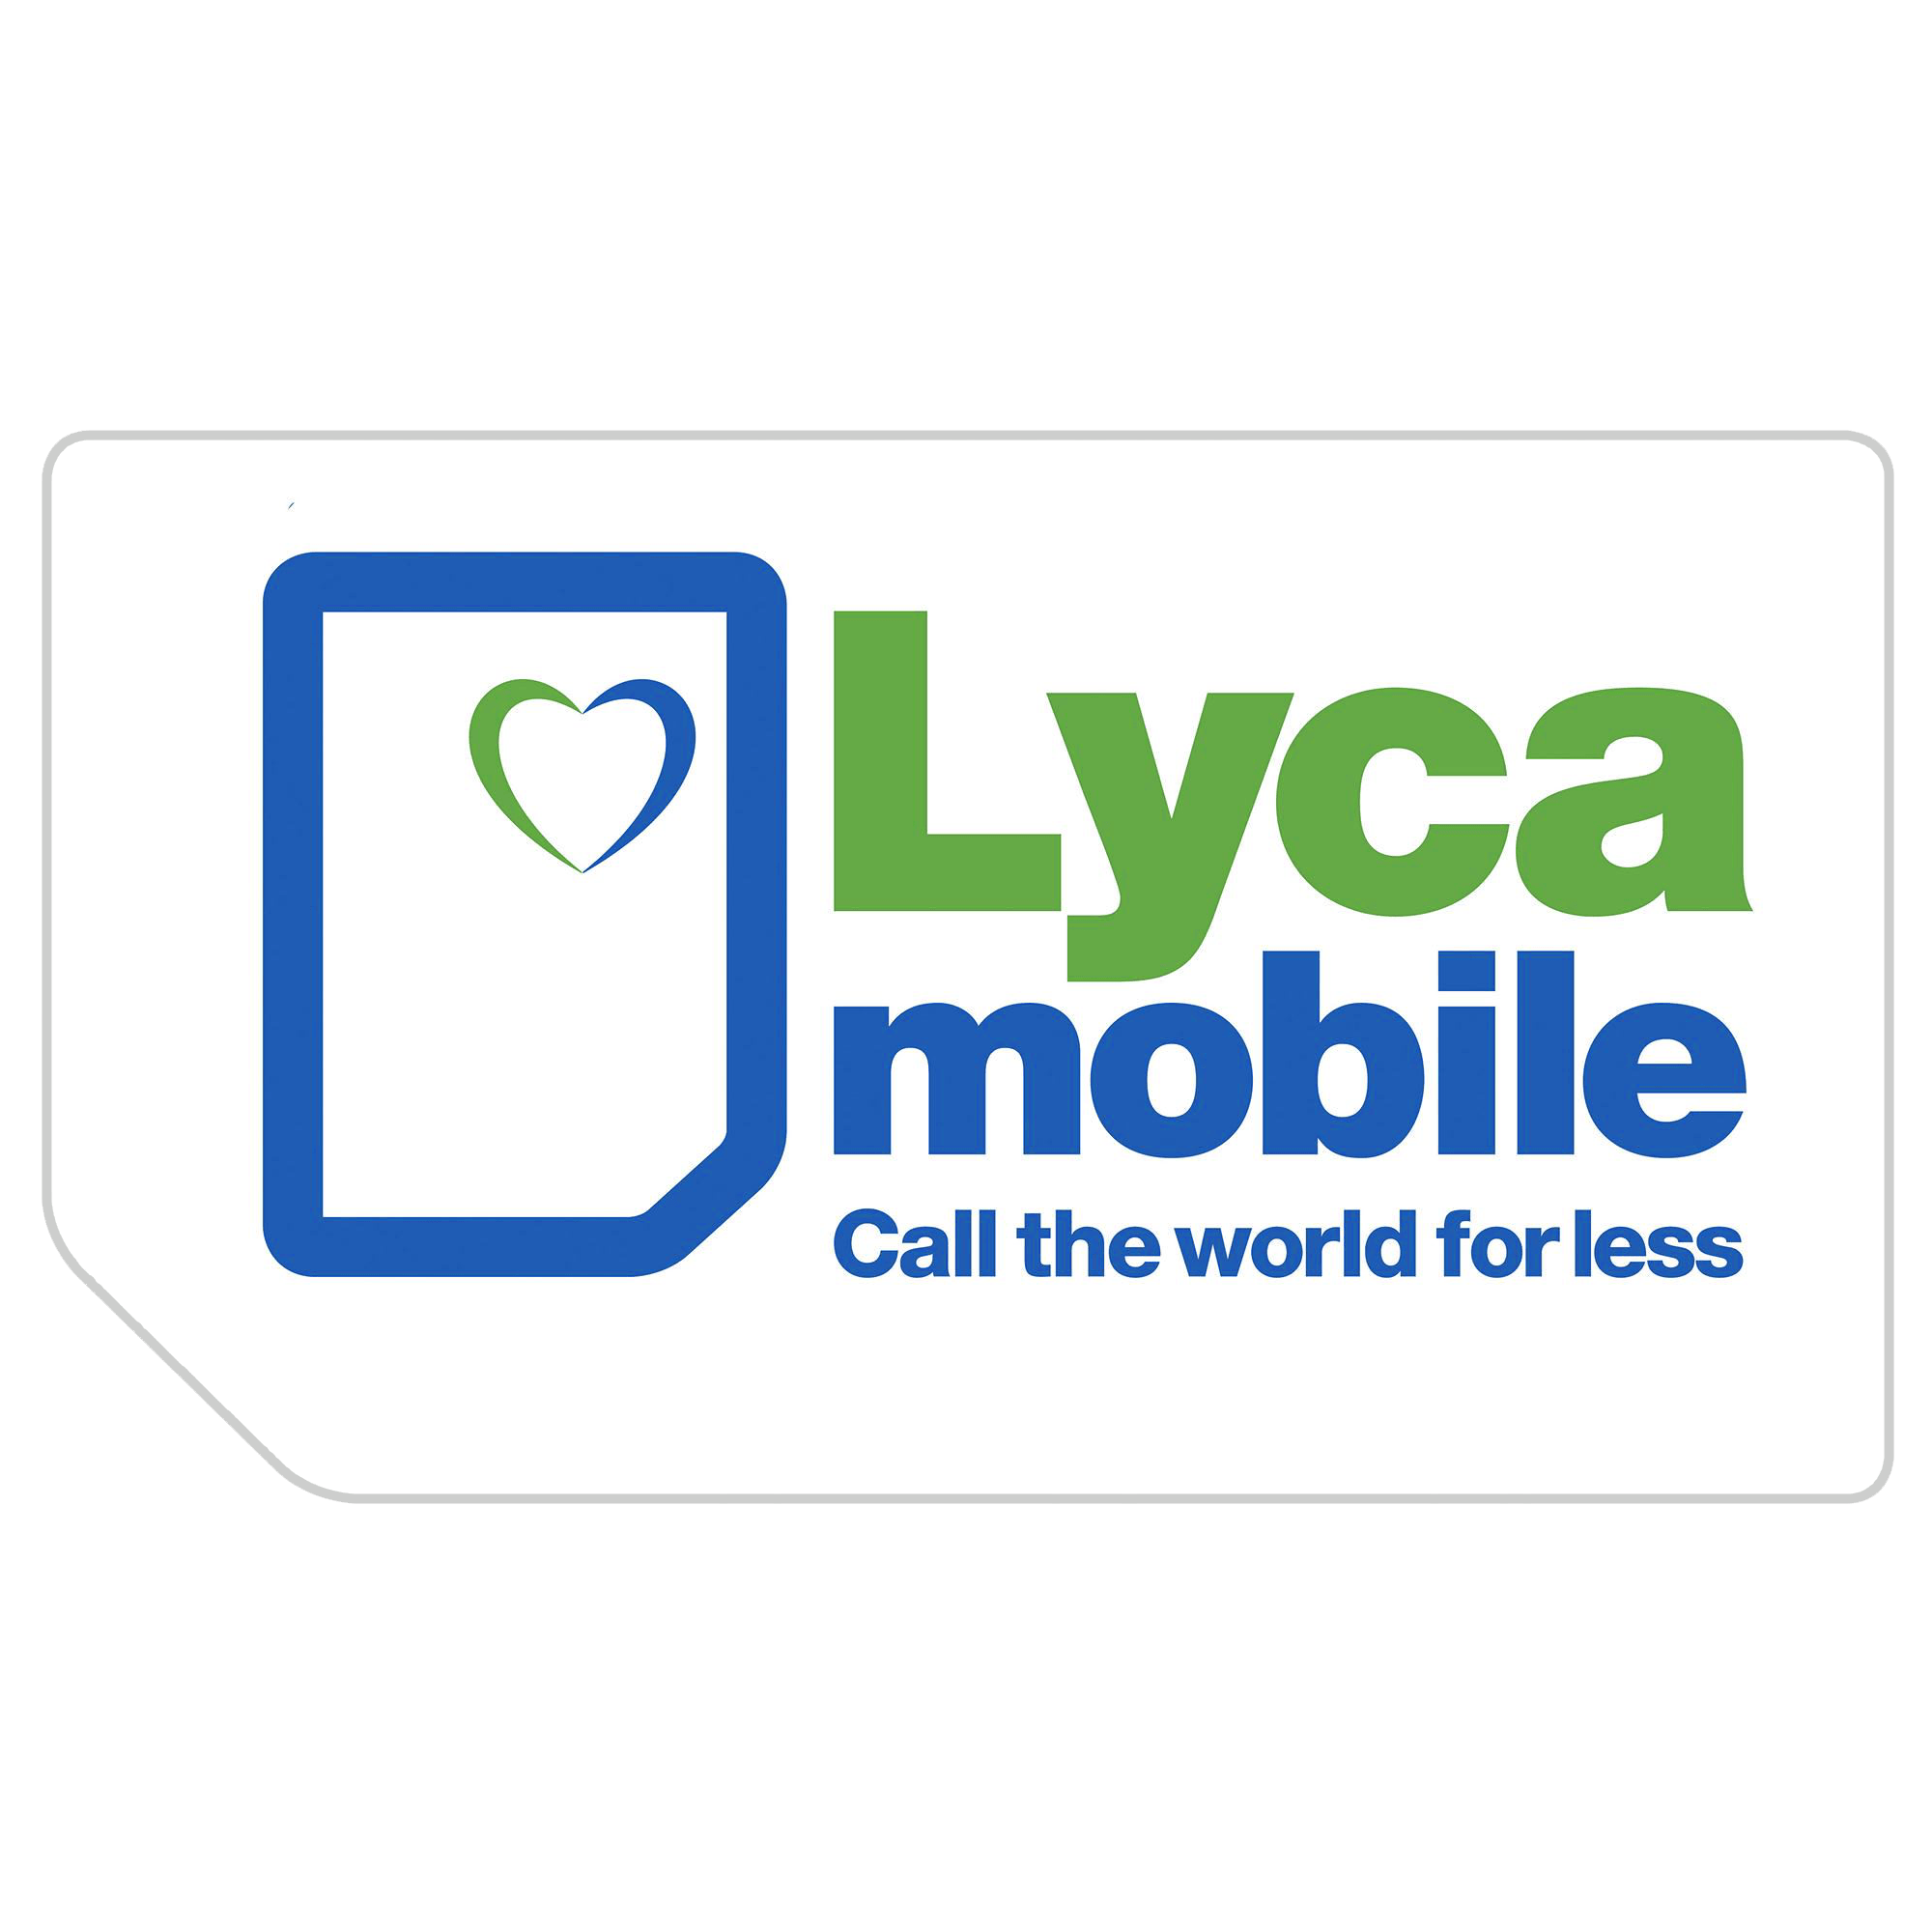 Lyca Mobile Logo - Use of this website - Lycamobile